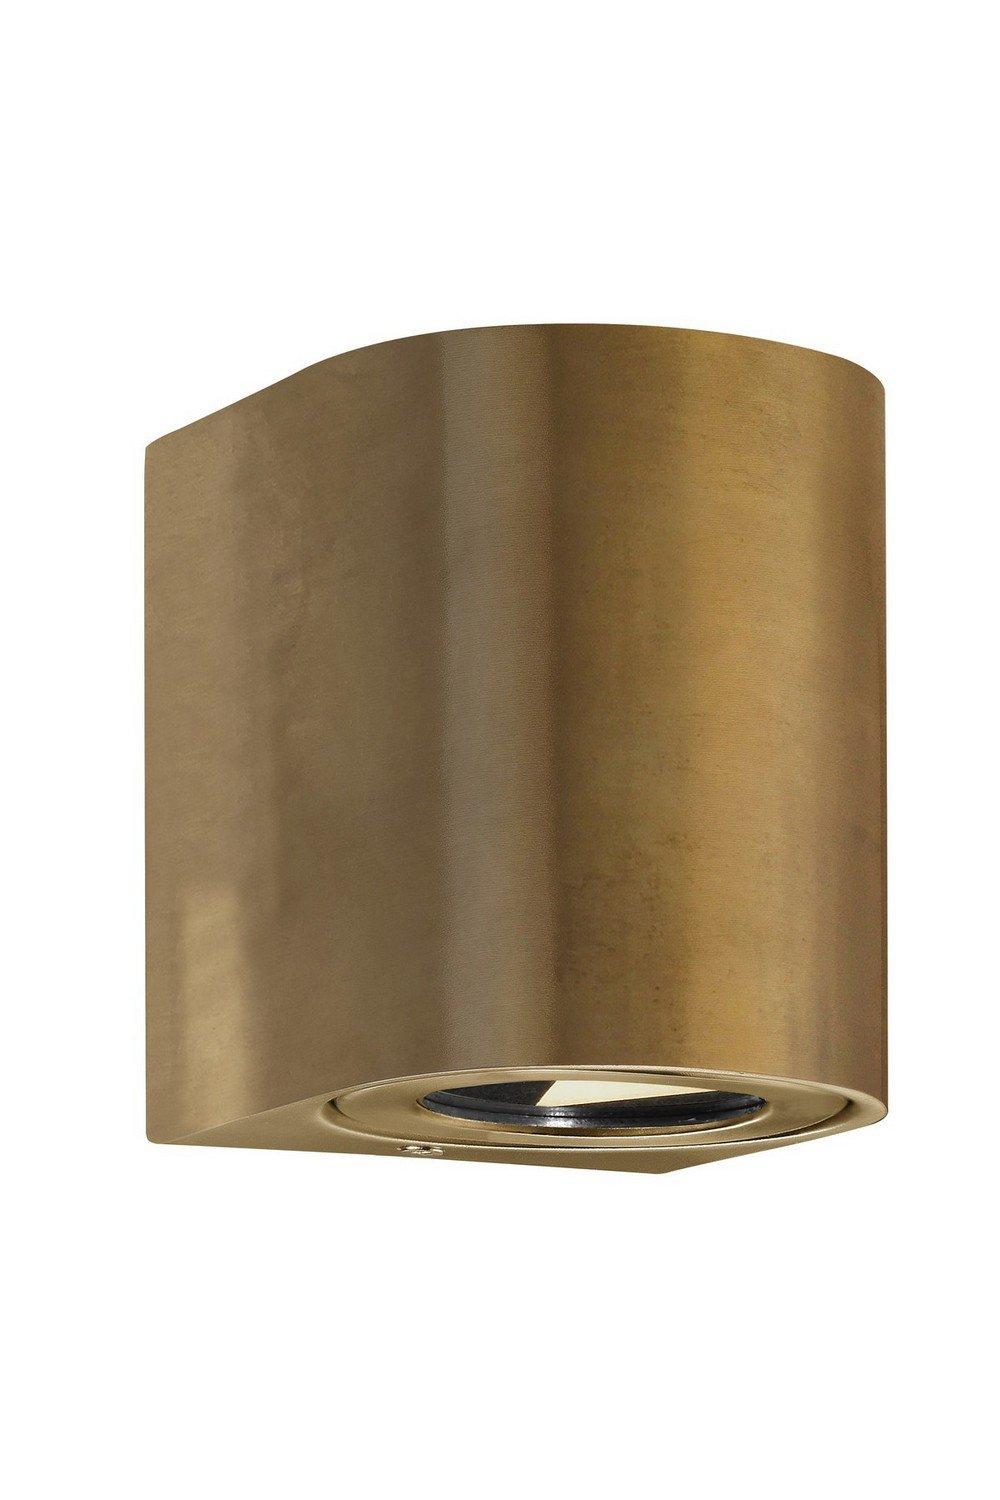 Canto LED Outdoor Up Down Wall Lamp Brass IP44 2700K